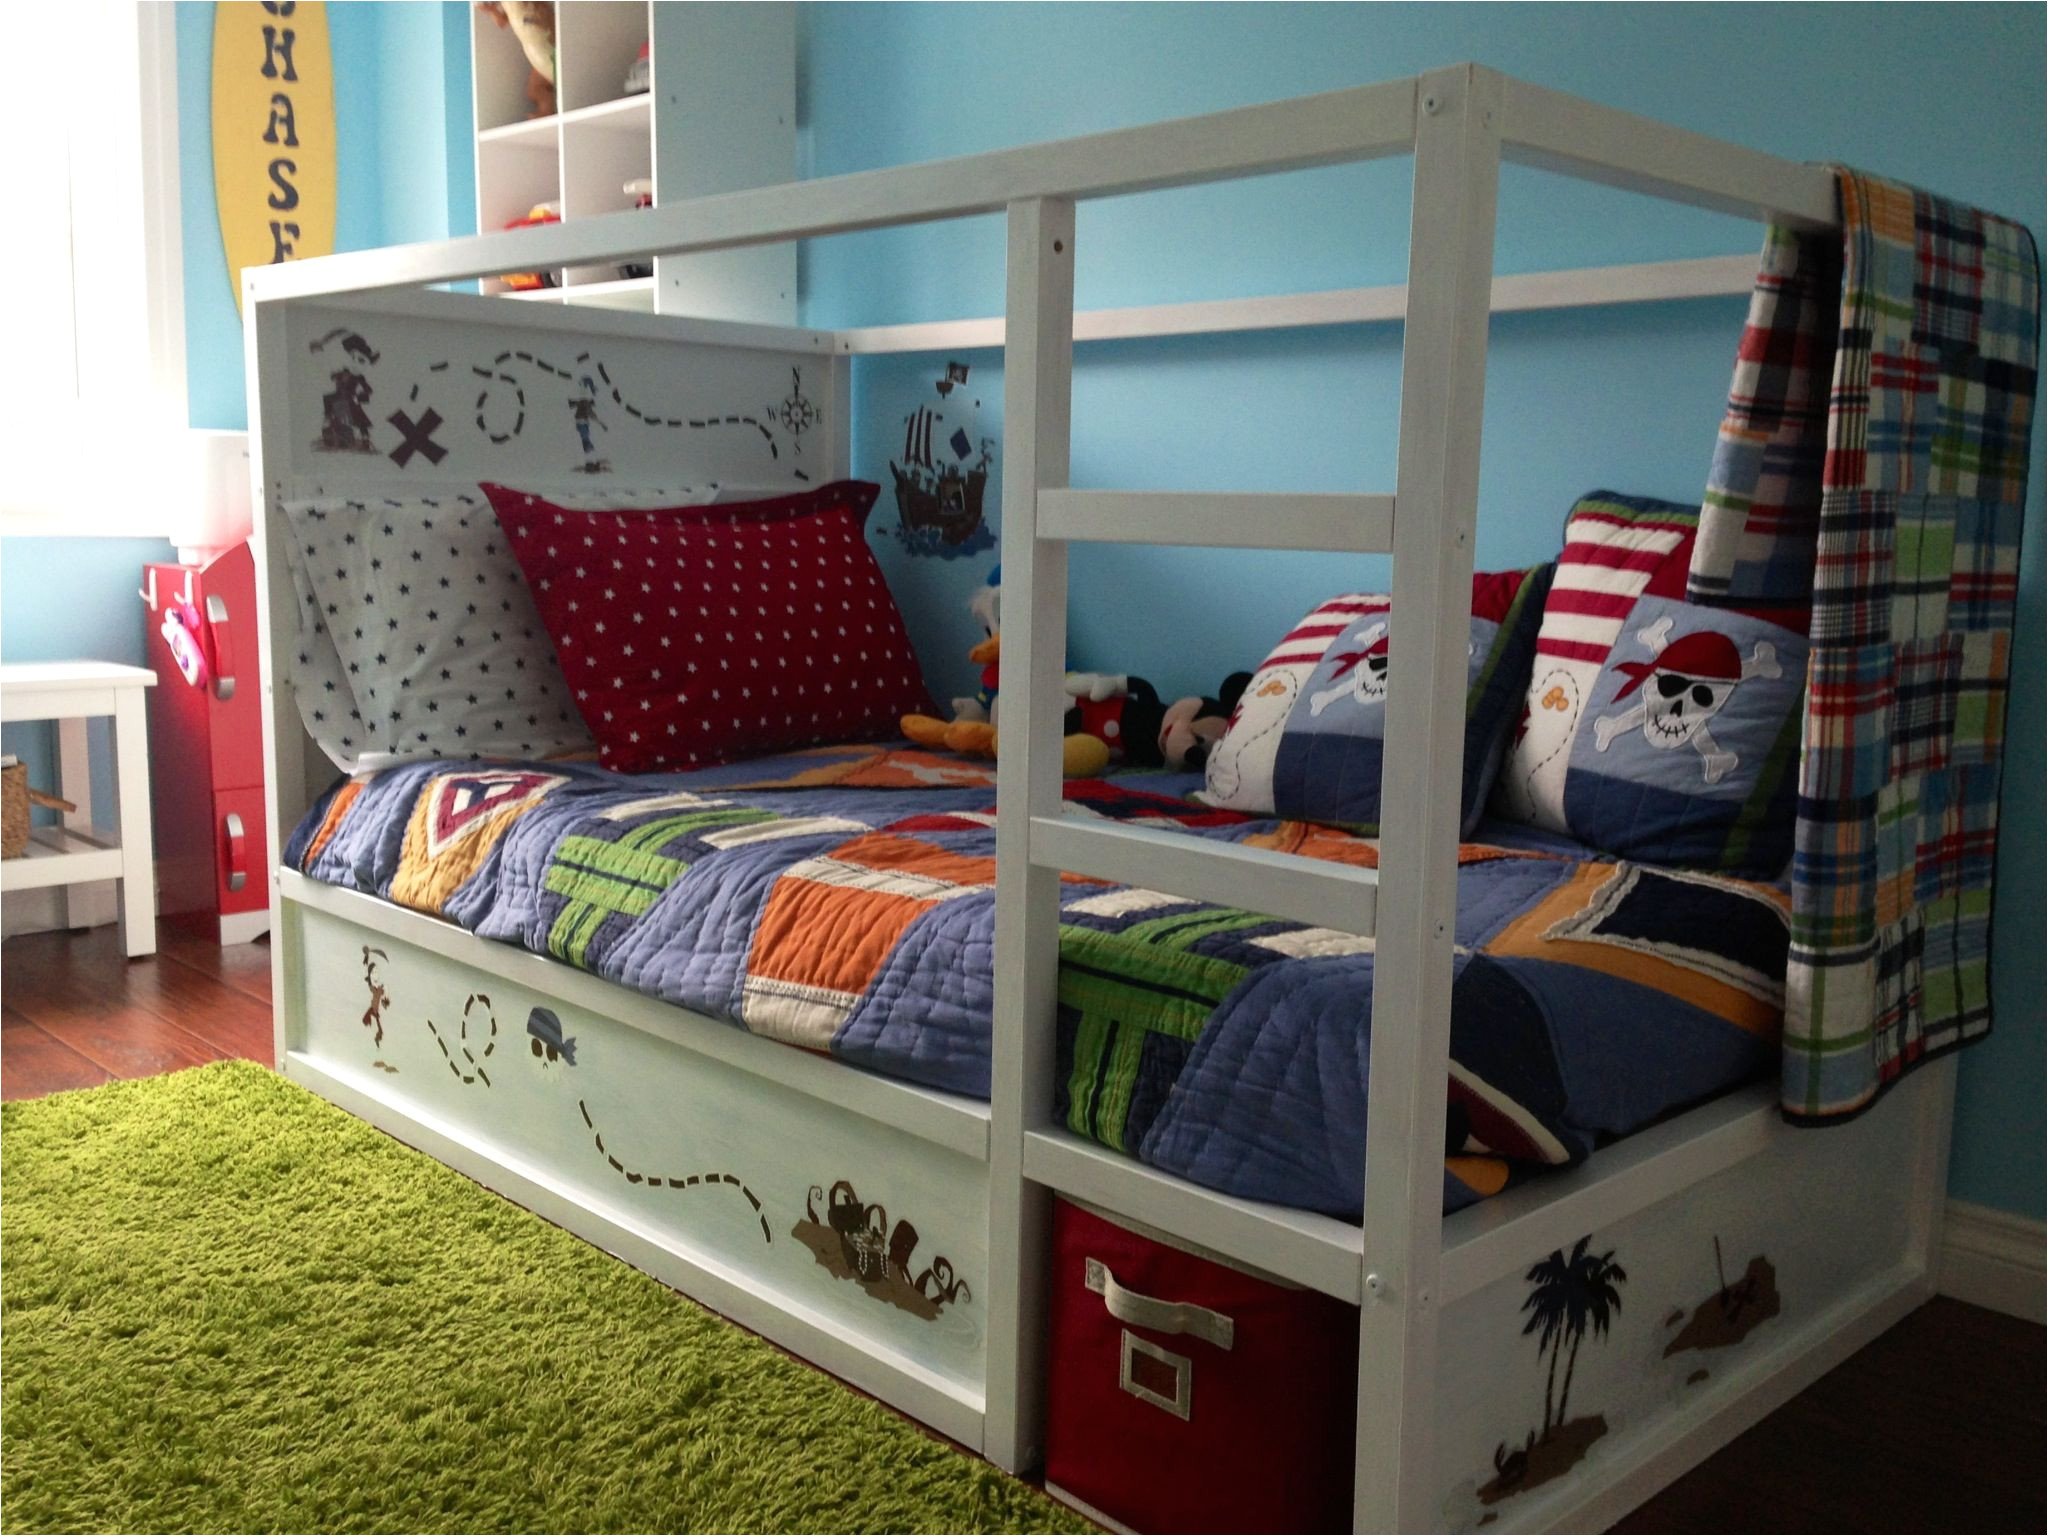 ikea bunk bed made into a pirate ship